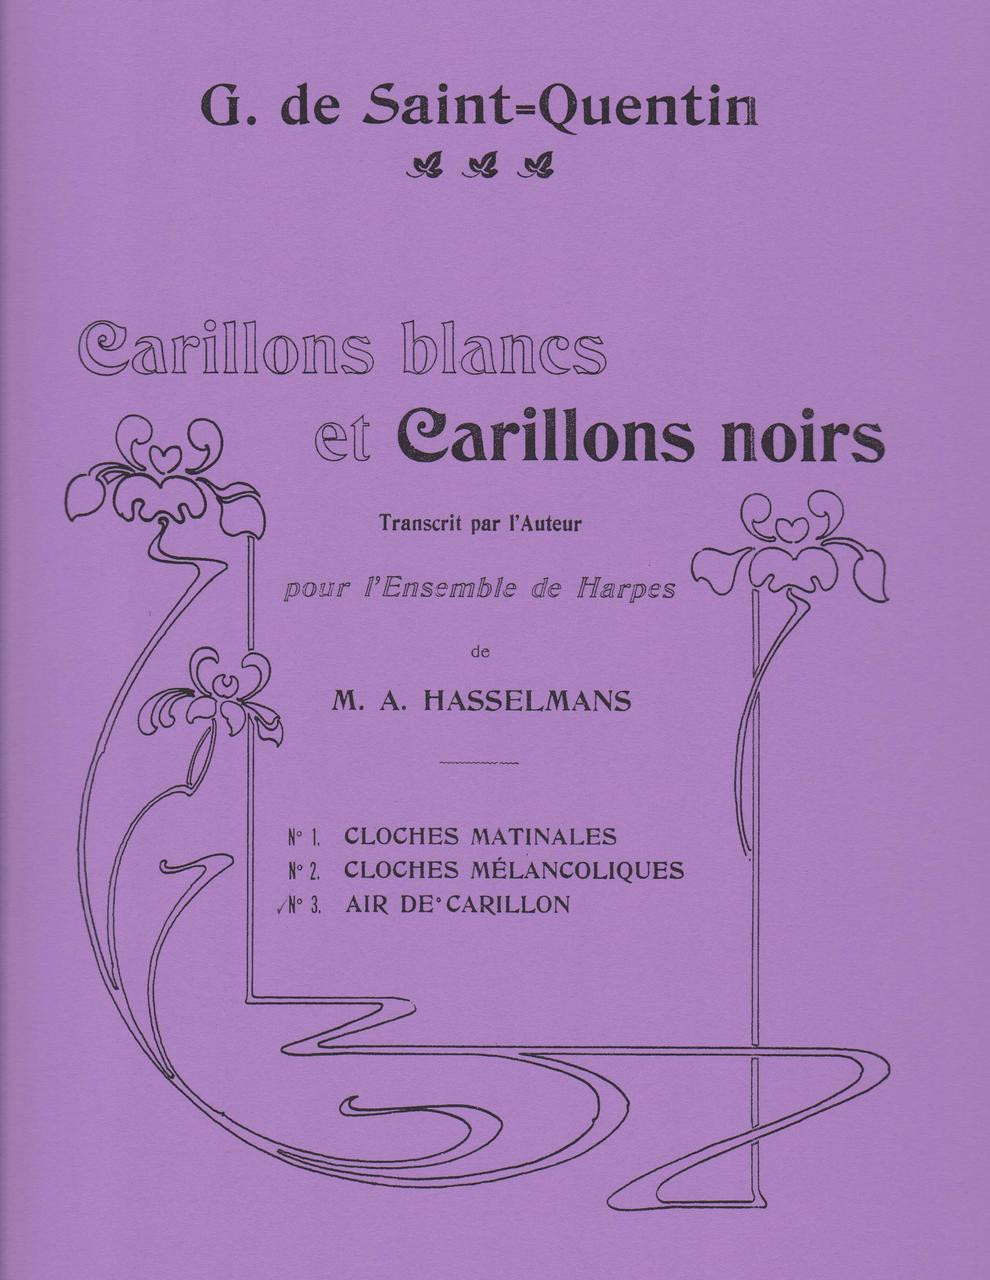 Carillons